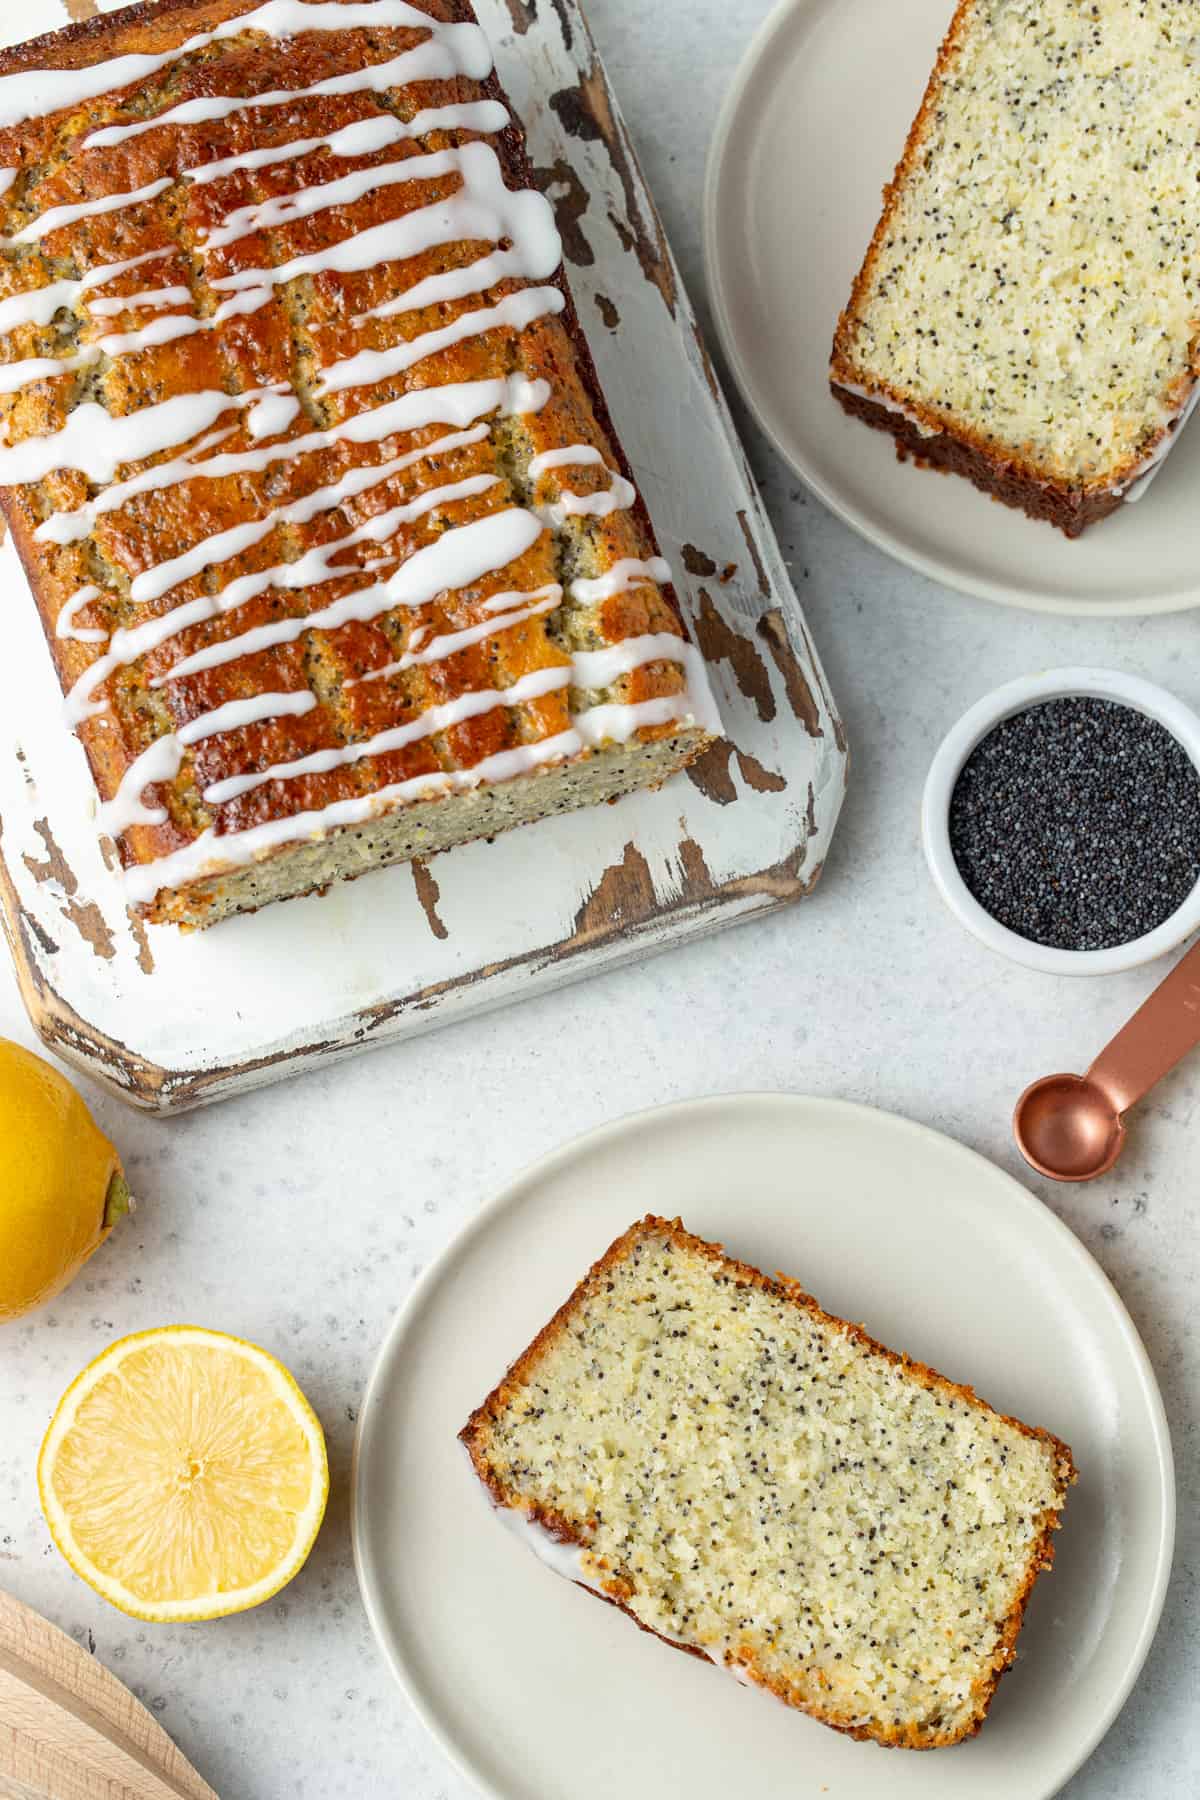 Slices of lemon poppy seed bread on white plates. Loaf on lemon poppy seed bread on a white wooden cutting board.